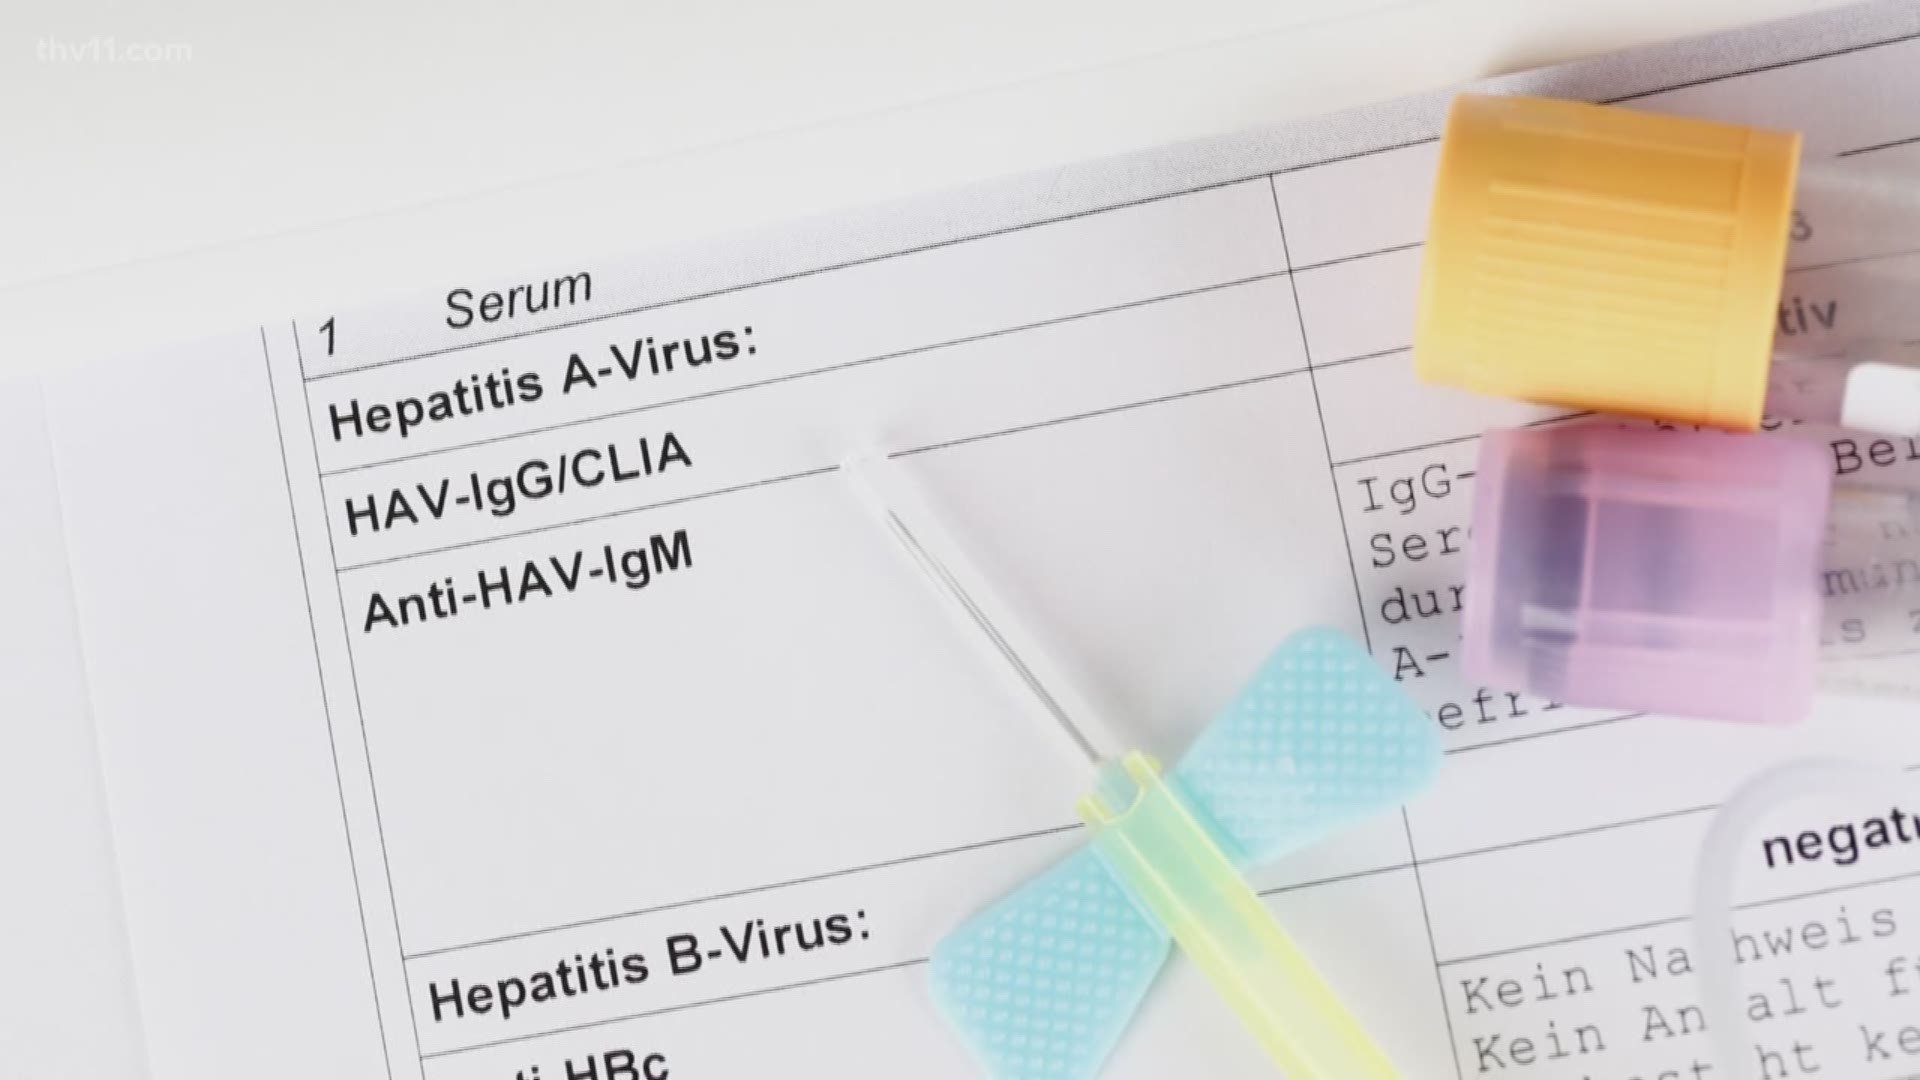 Since February of last year, there have been hundreds of reported cases of Hepatits A in Northeast Arkansas and even one death.